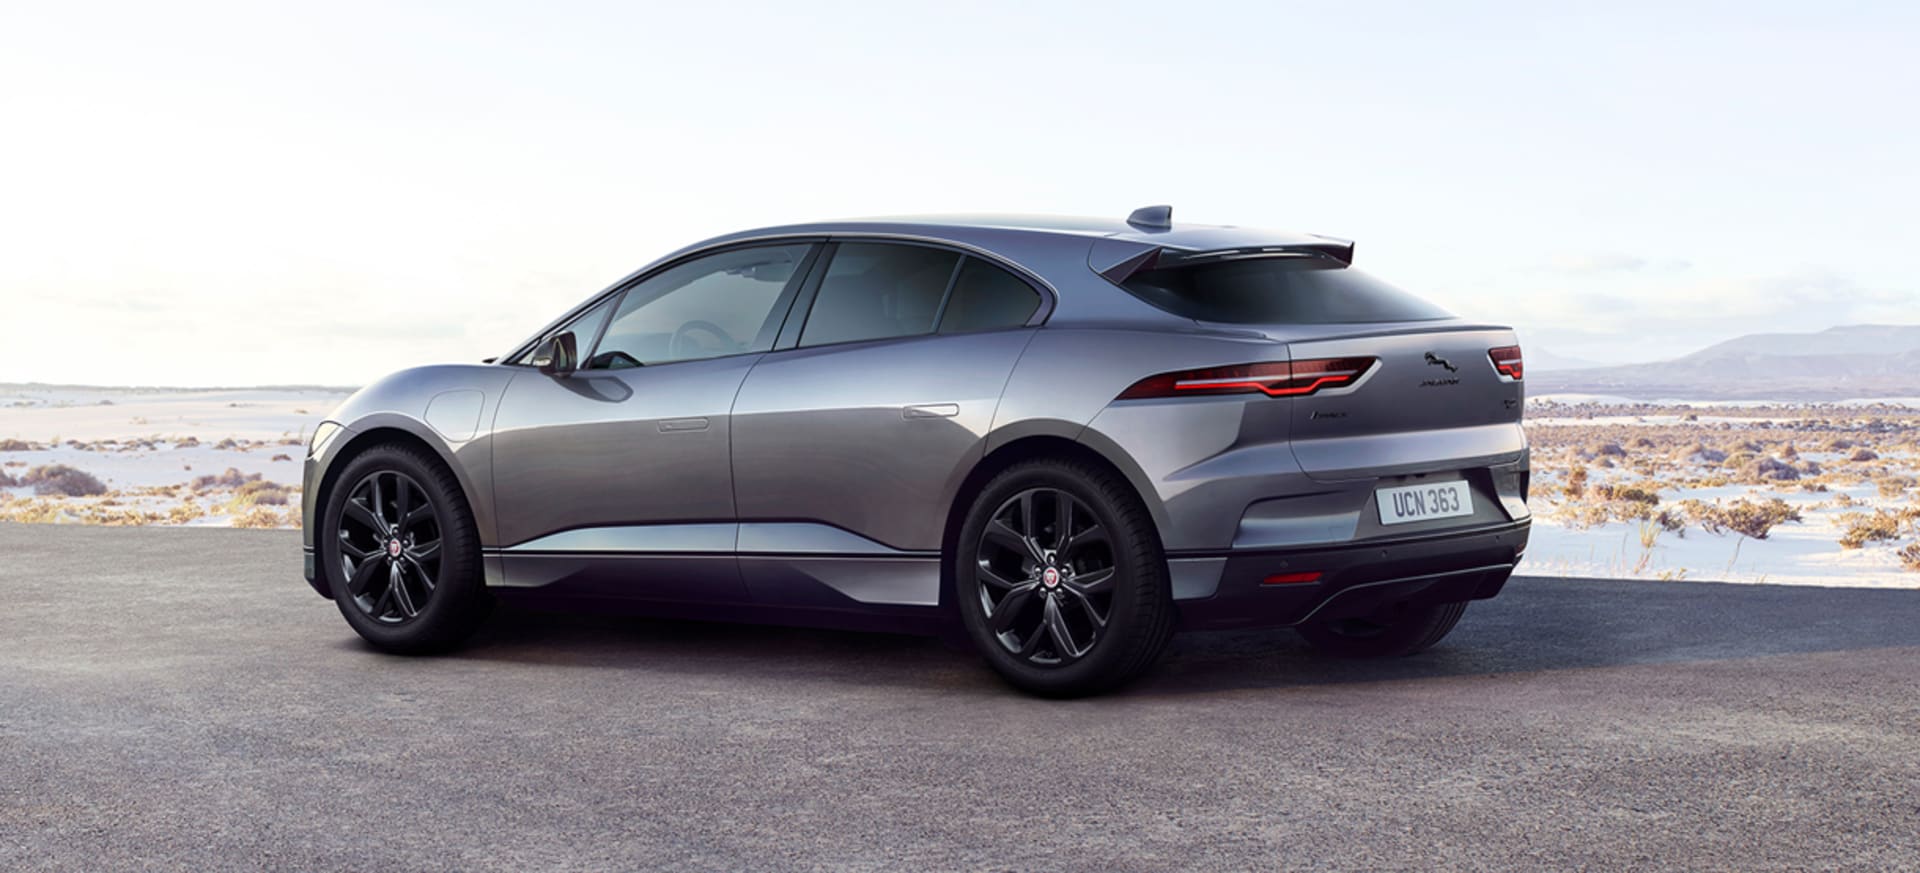 Jaguar I-Pace Brand New Immediate Delivery Stock